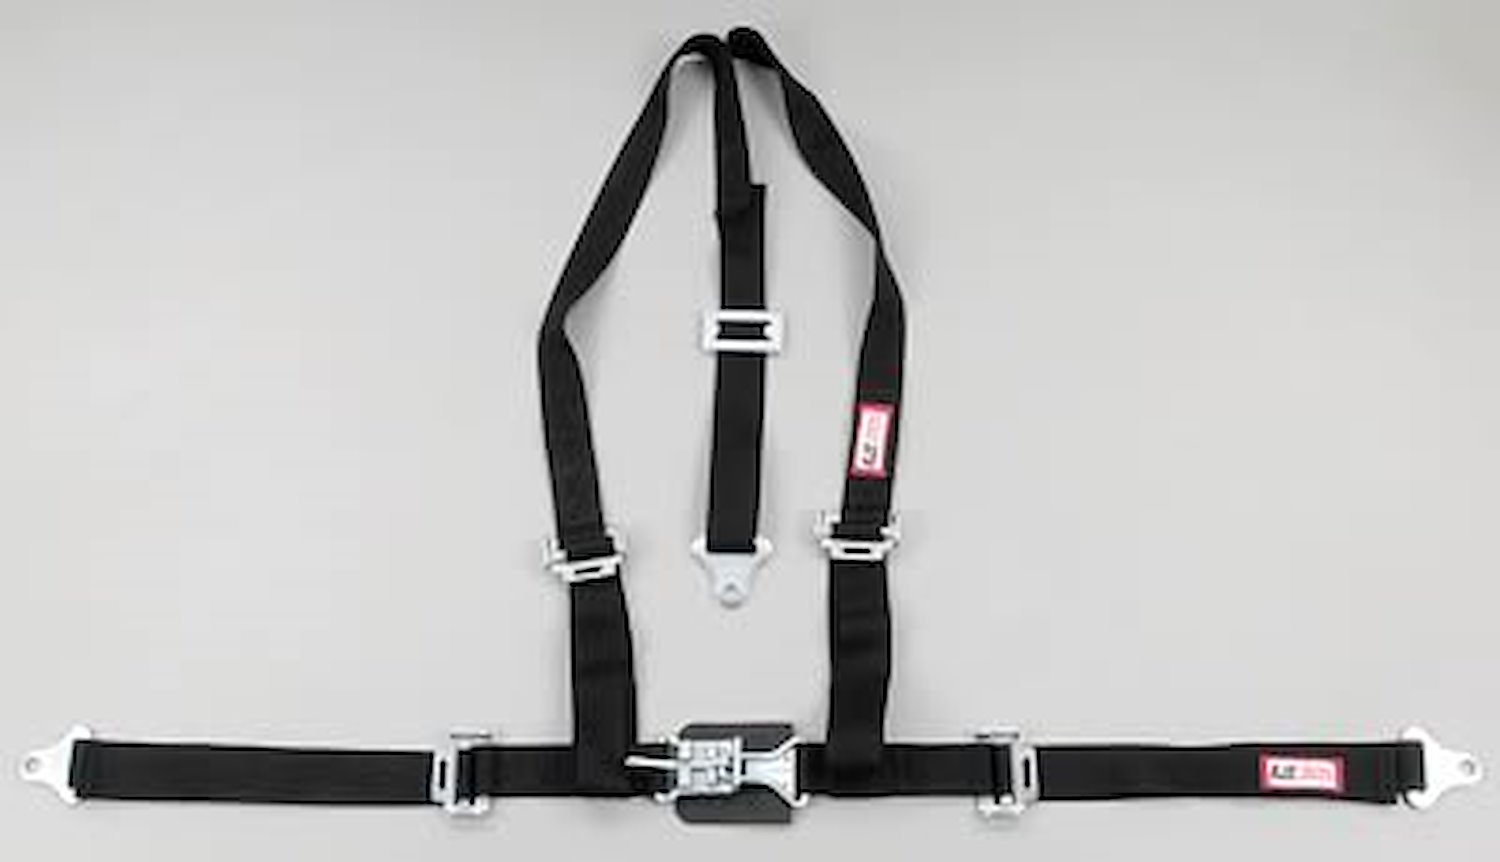 NON-SFI L&L HARNESS 2 PULL DOWN Lap Belt SEWN IN 2 S.H. Y FLOOR Mount ALL WRAP ENDS YELLOW